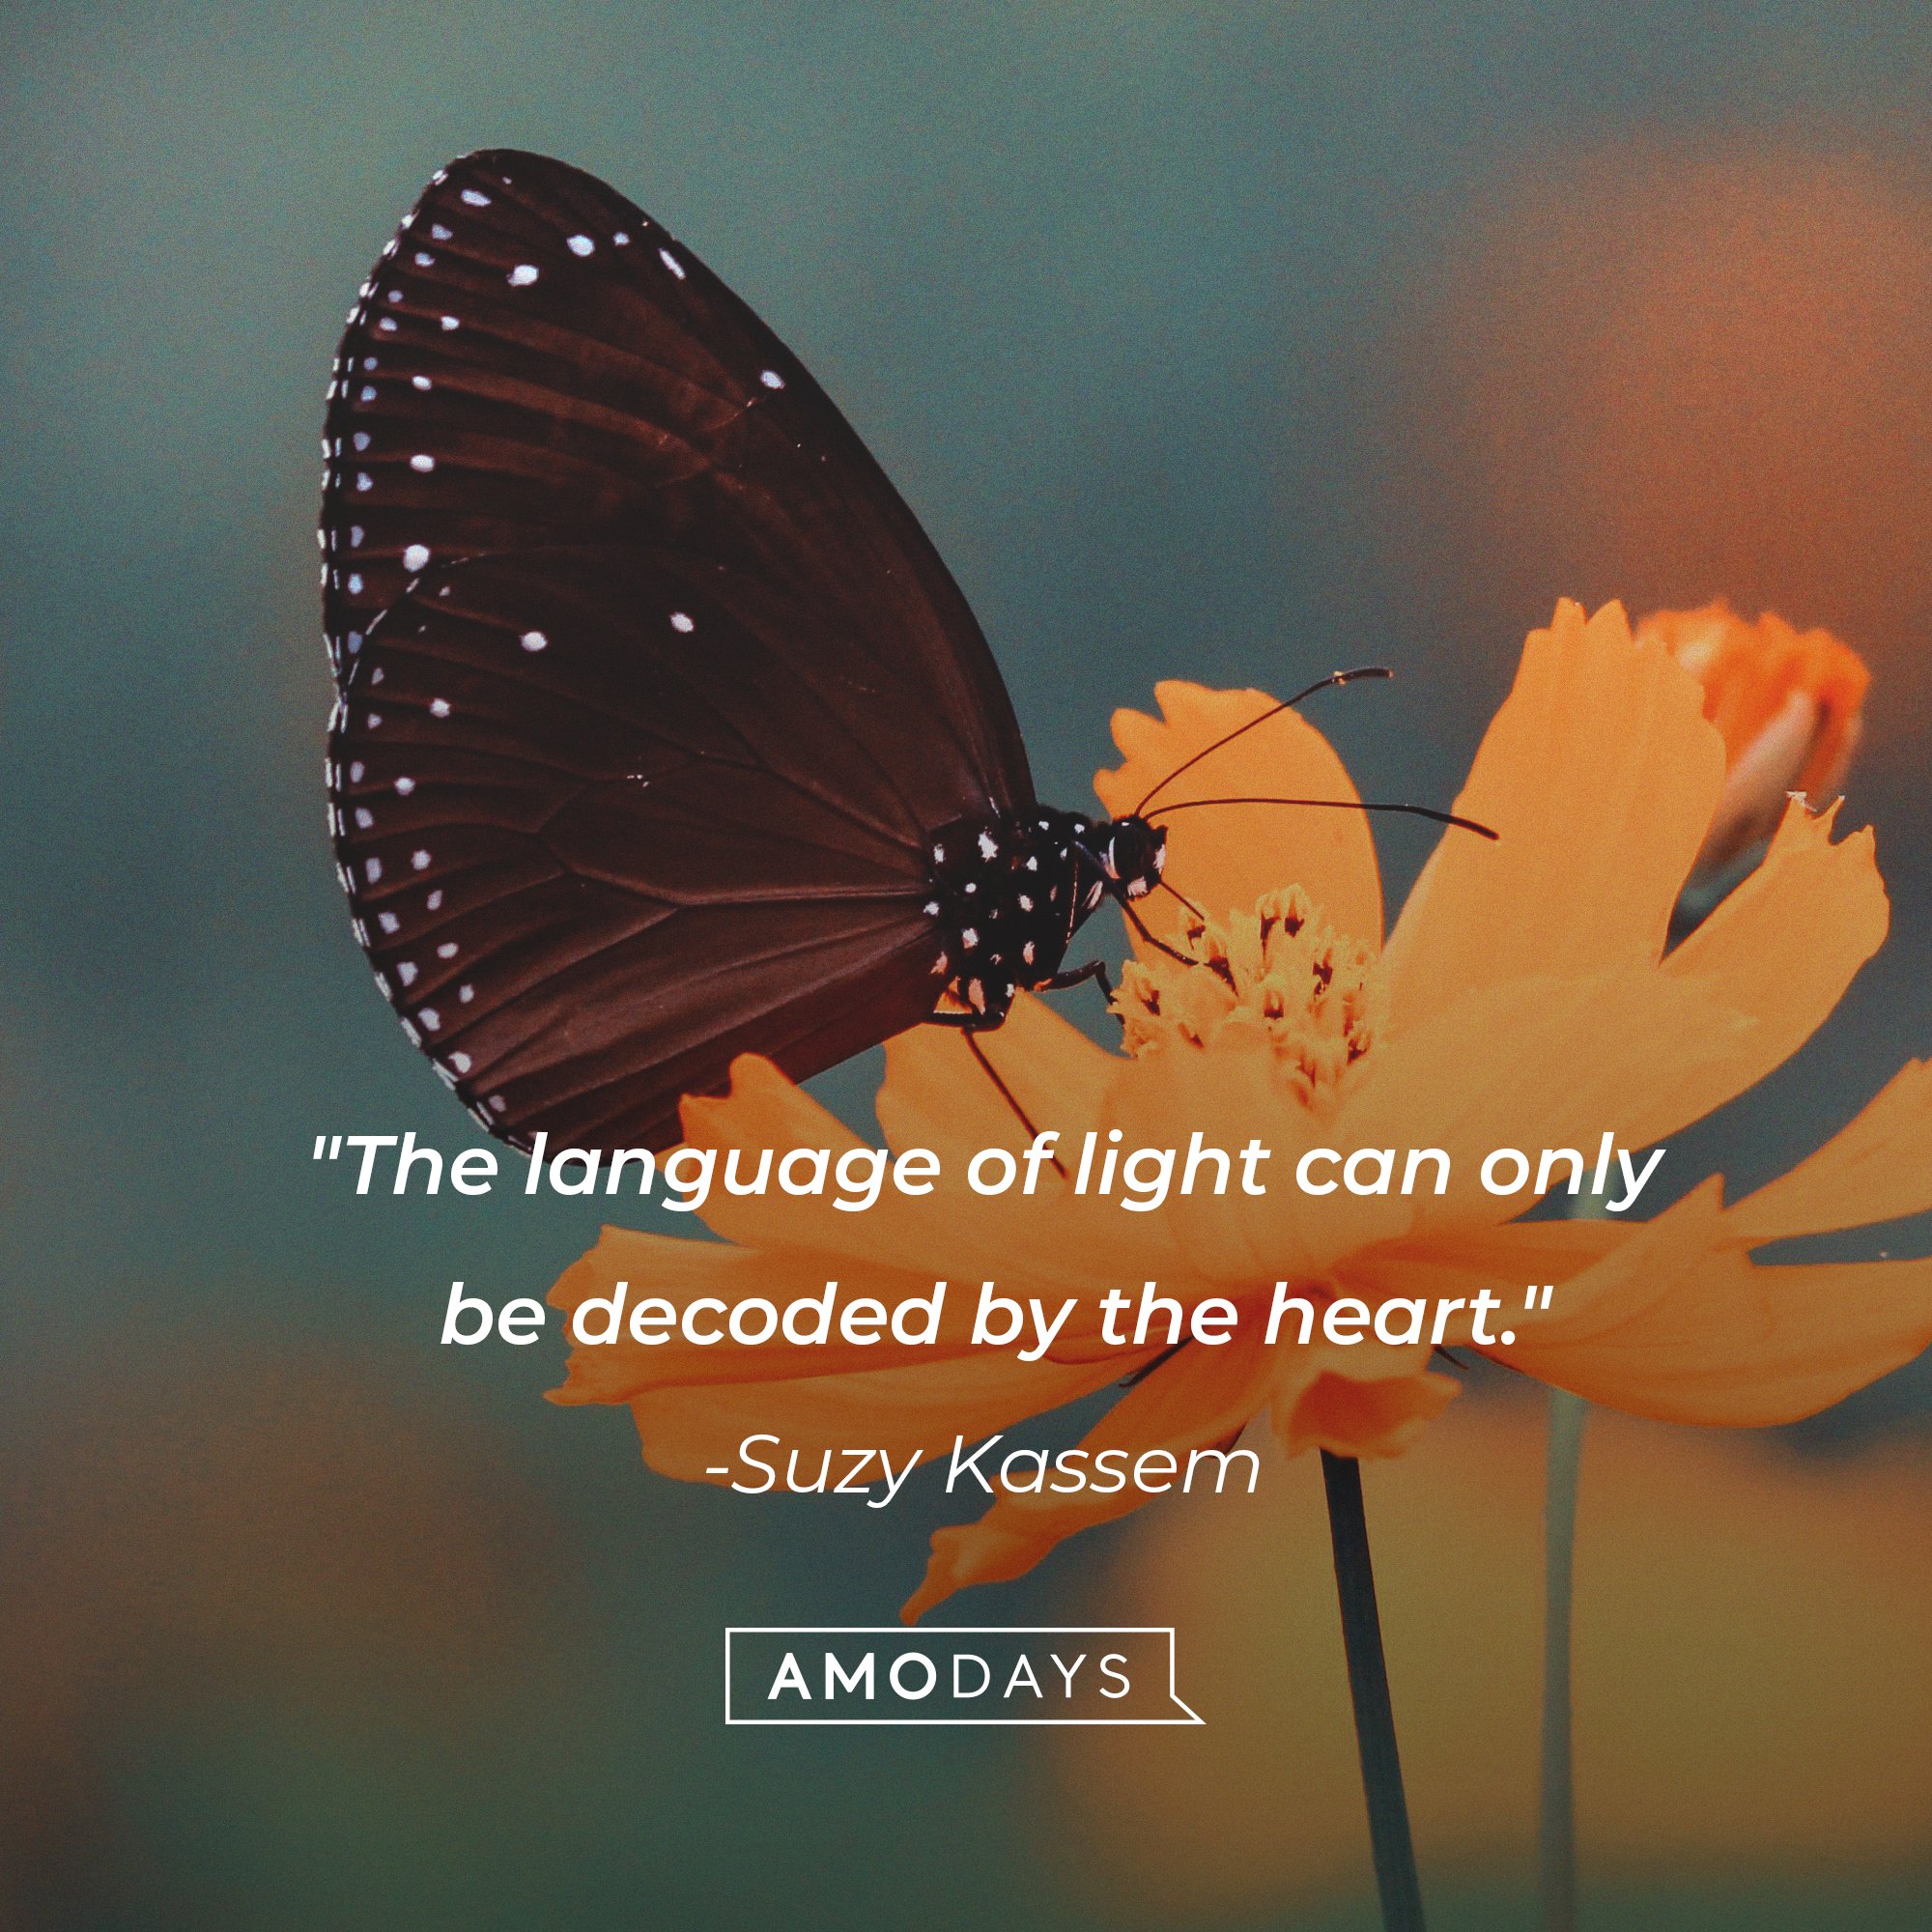 Suzy Kassem’s quote: "The language of light can only be decoded by the heart." | Image: AmoDays